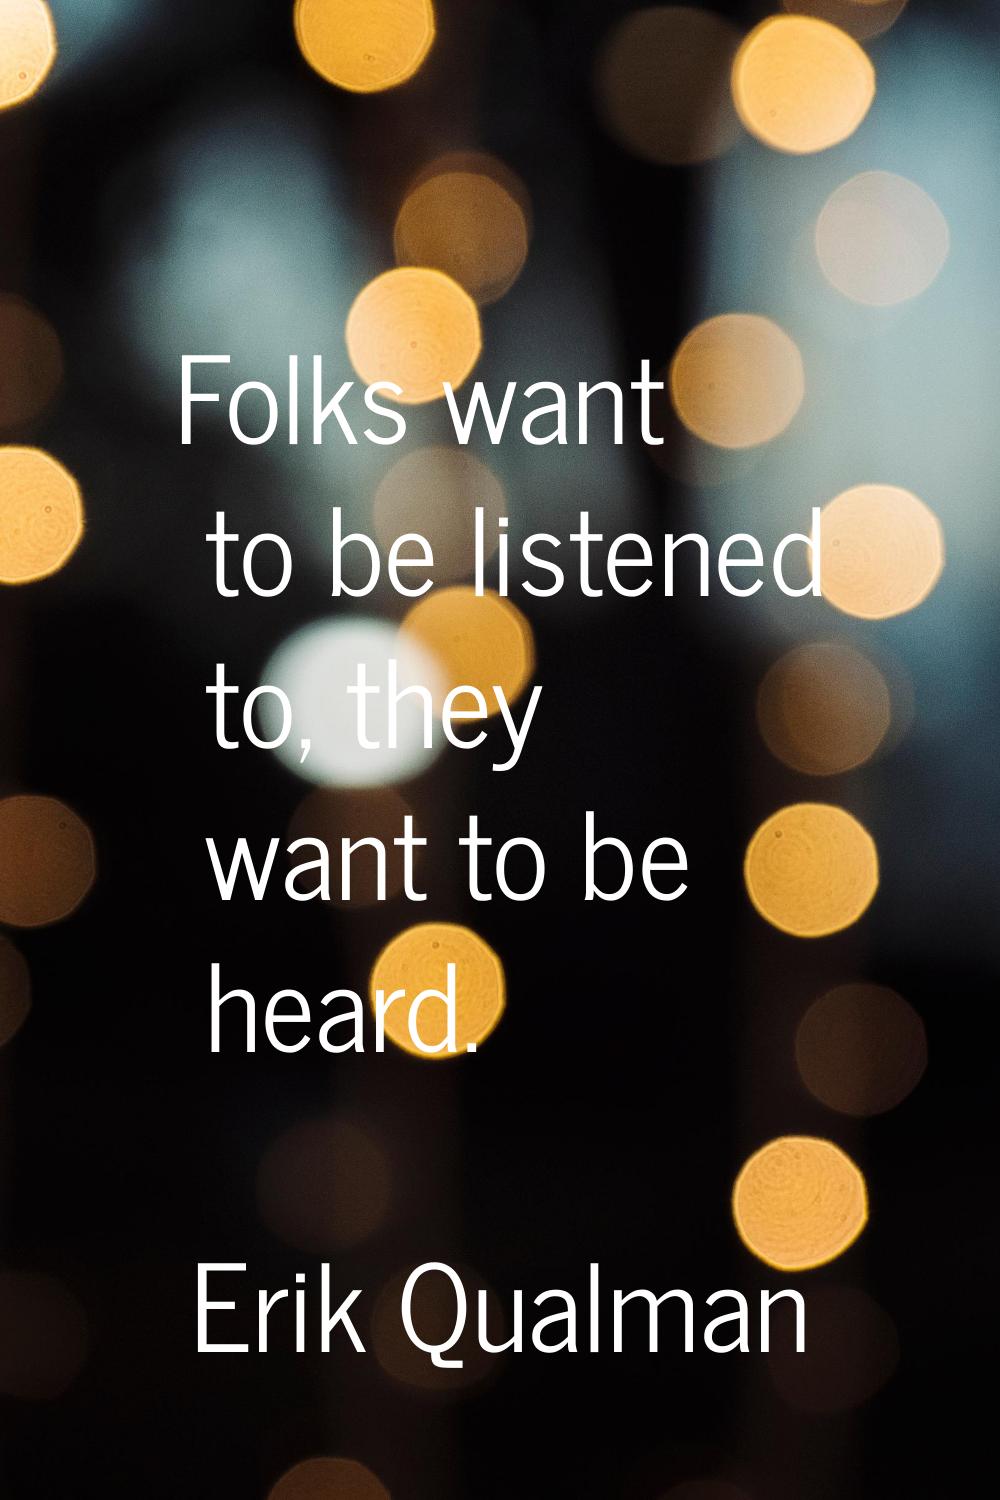 Folks want to be listened to, they want to be heard.